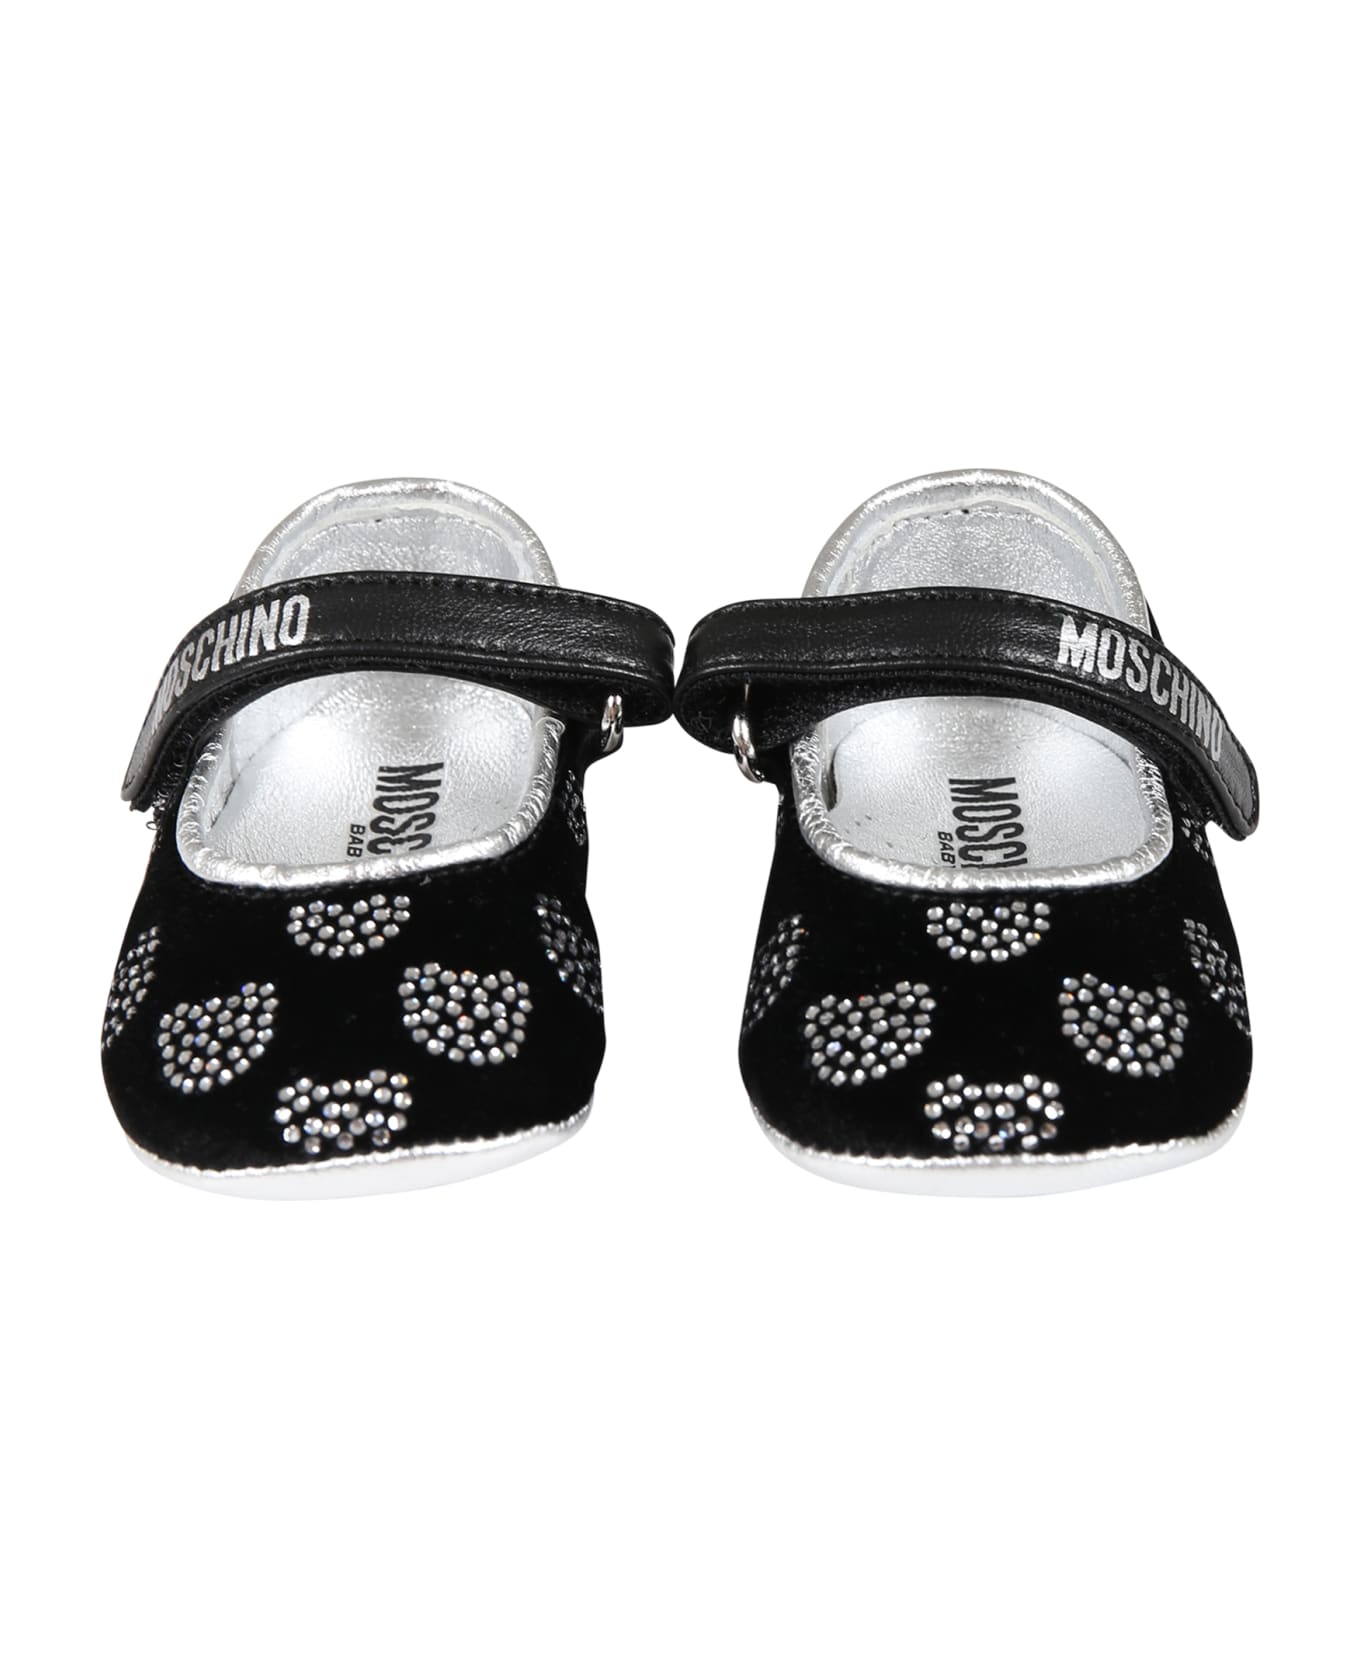 Moschino Black Ballet Flats For Baby Girl With Logo And Teddy Bear - Black シューズ